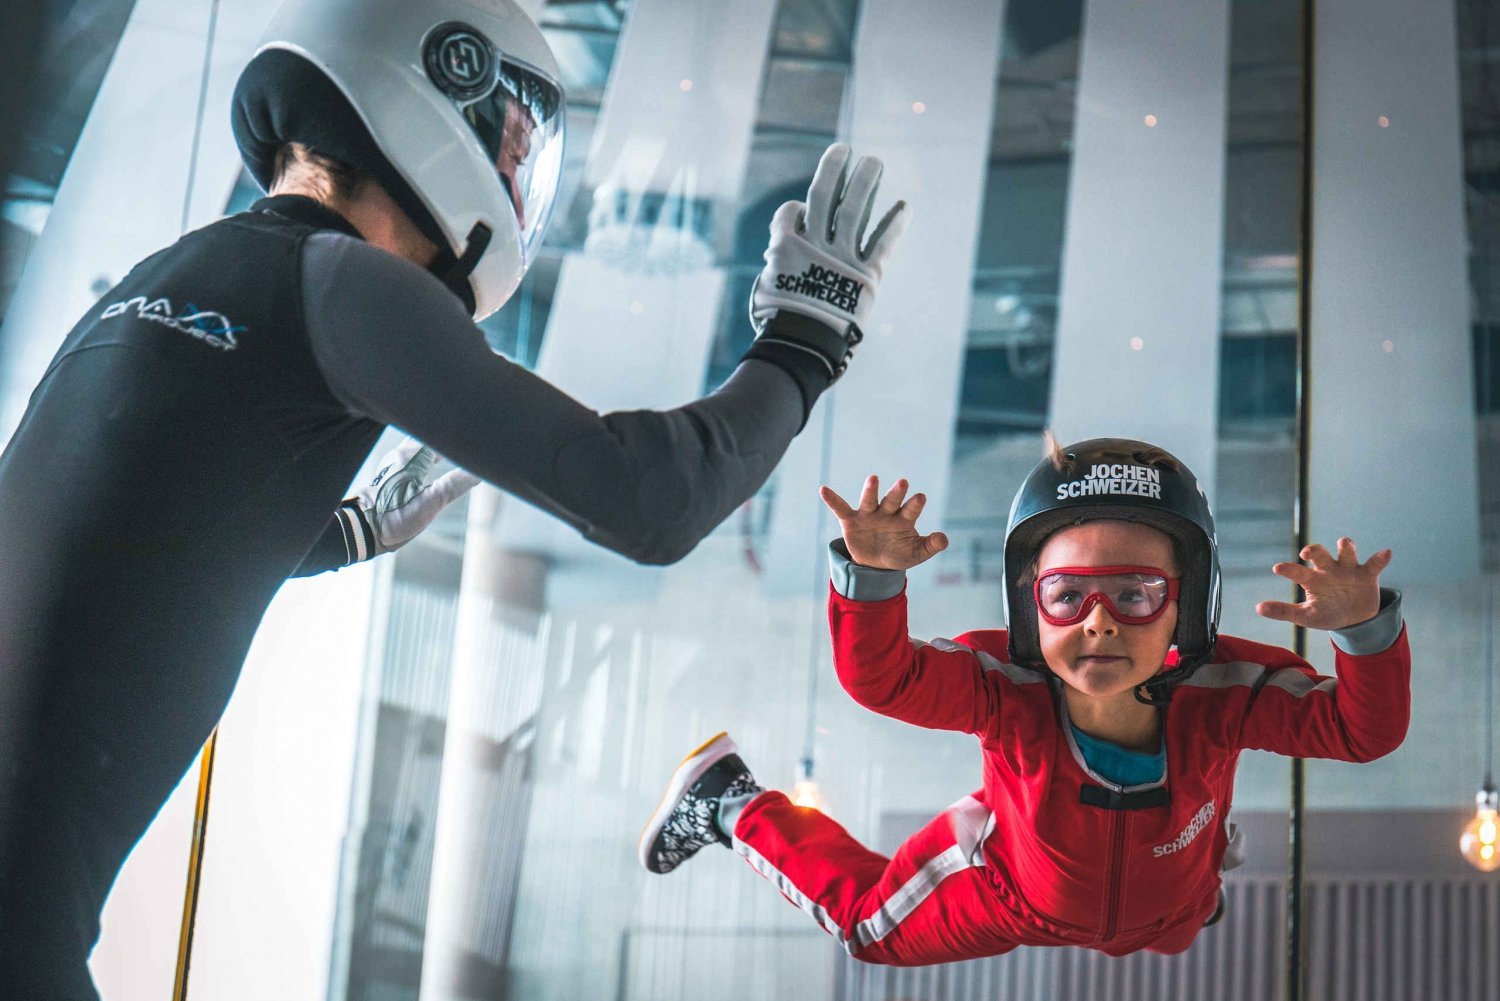 Bodyflying: Indoor Skydiving Experience for 2 People in Munich | My ...